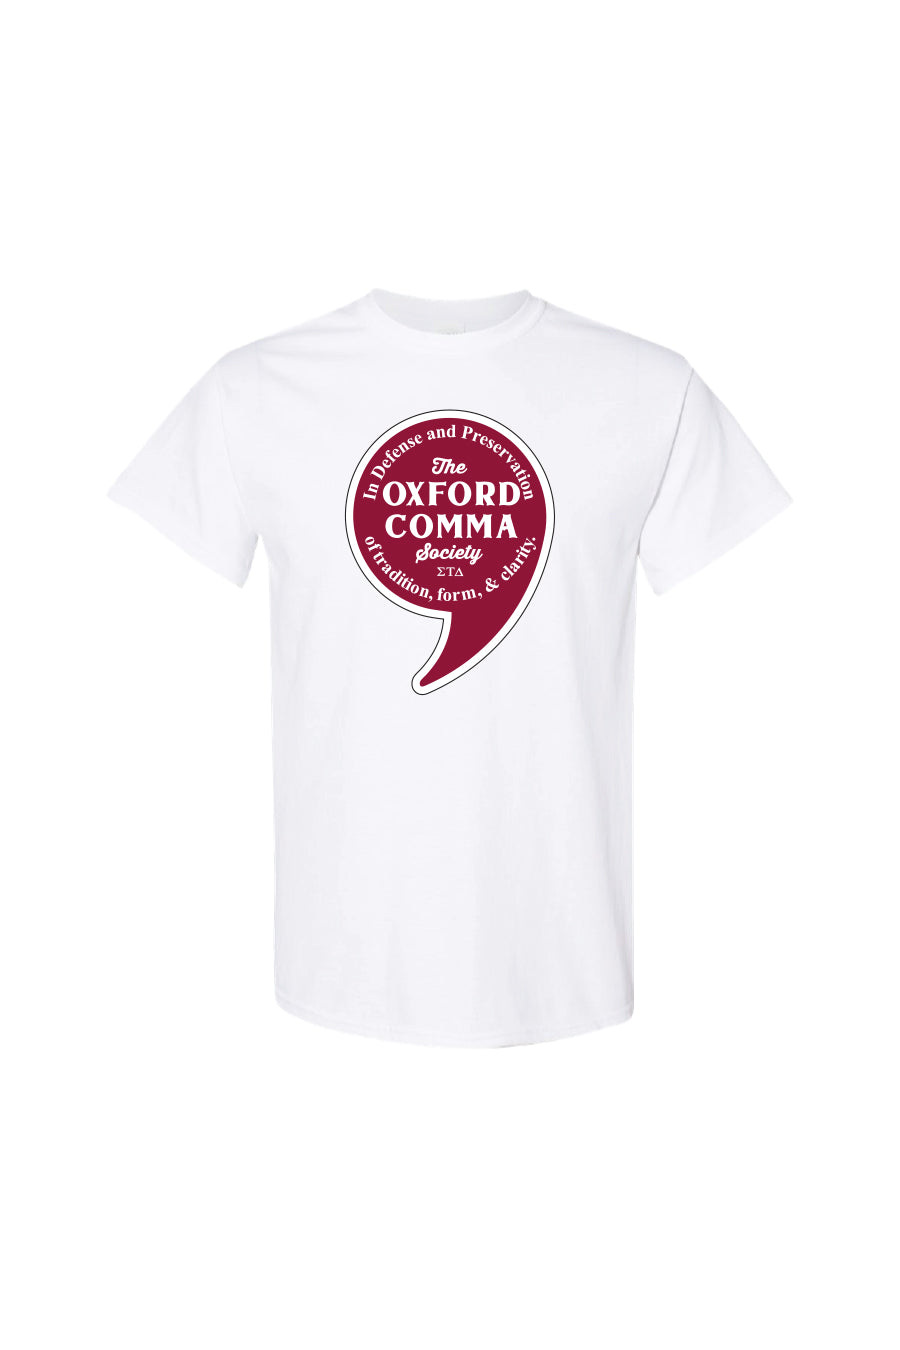 Oxford Comma Tee (Multiple Colors Available)